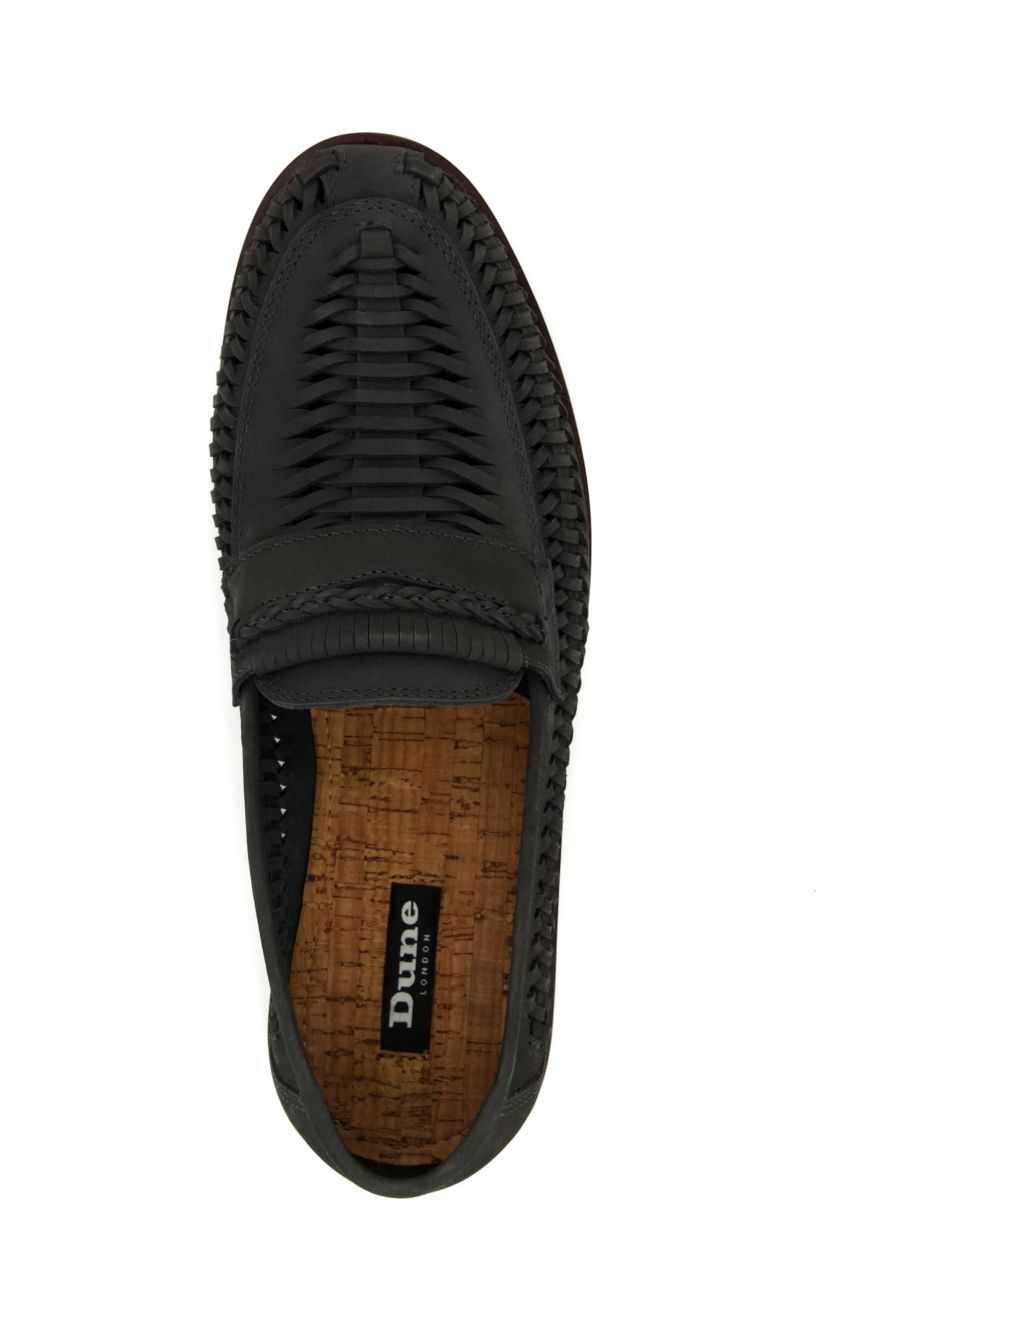 Leather Woven Flat Loafers image 5